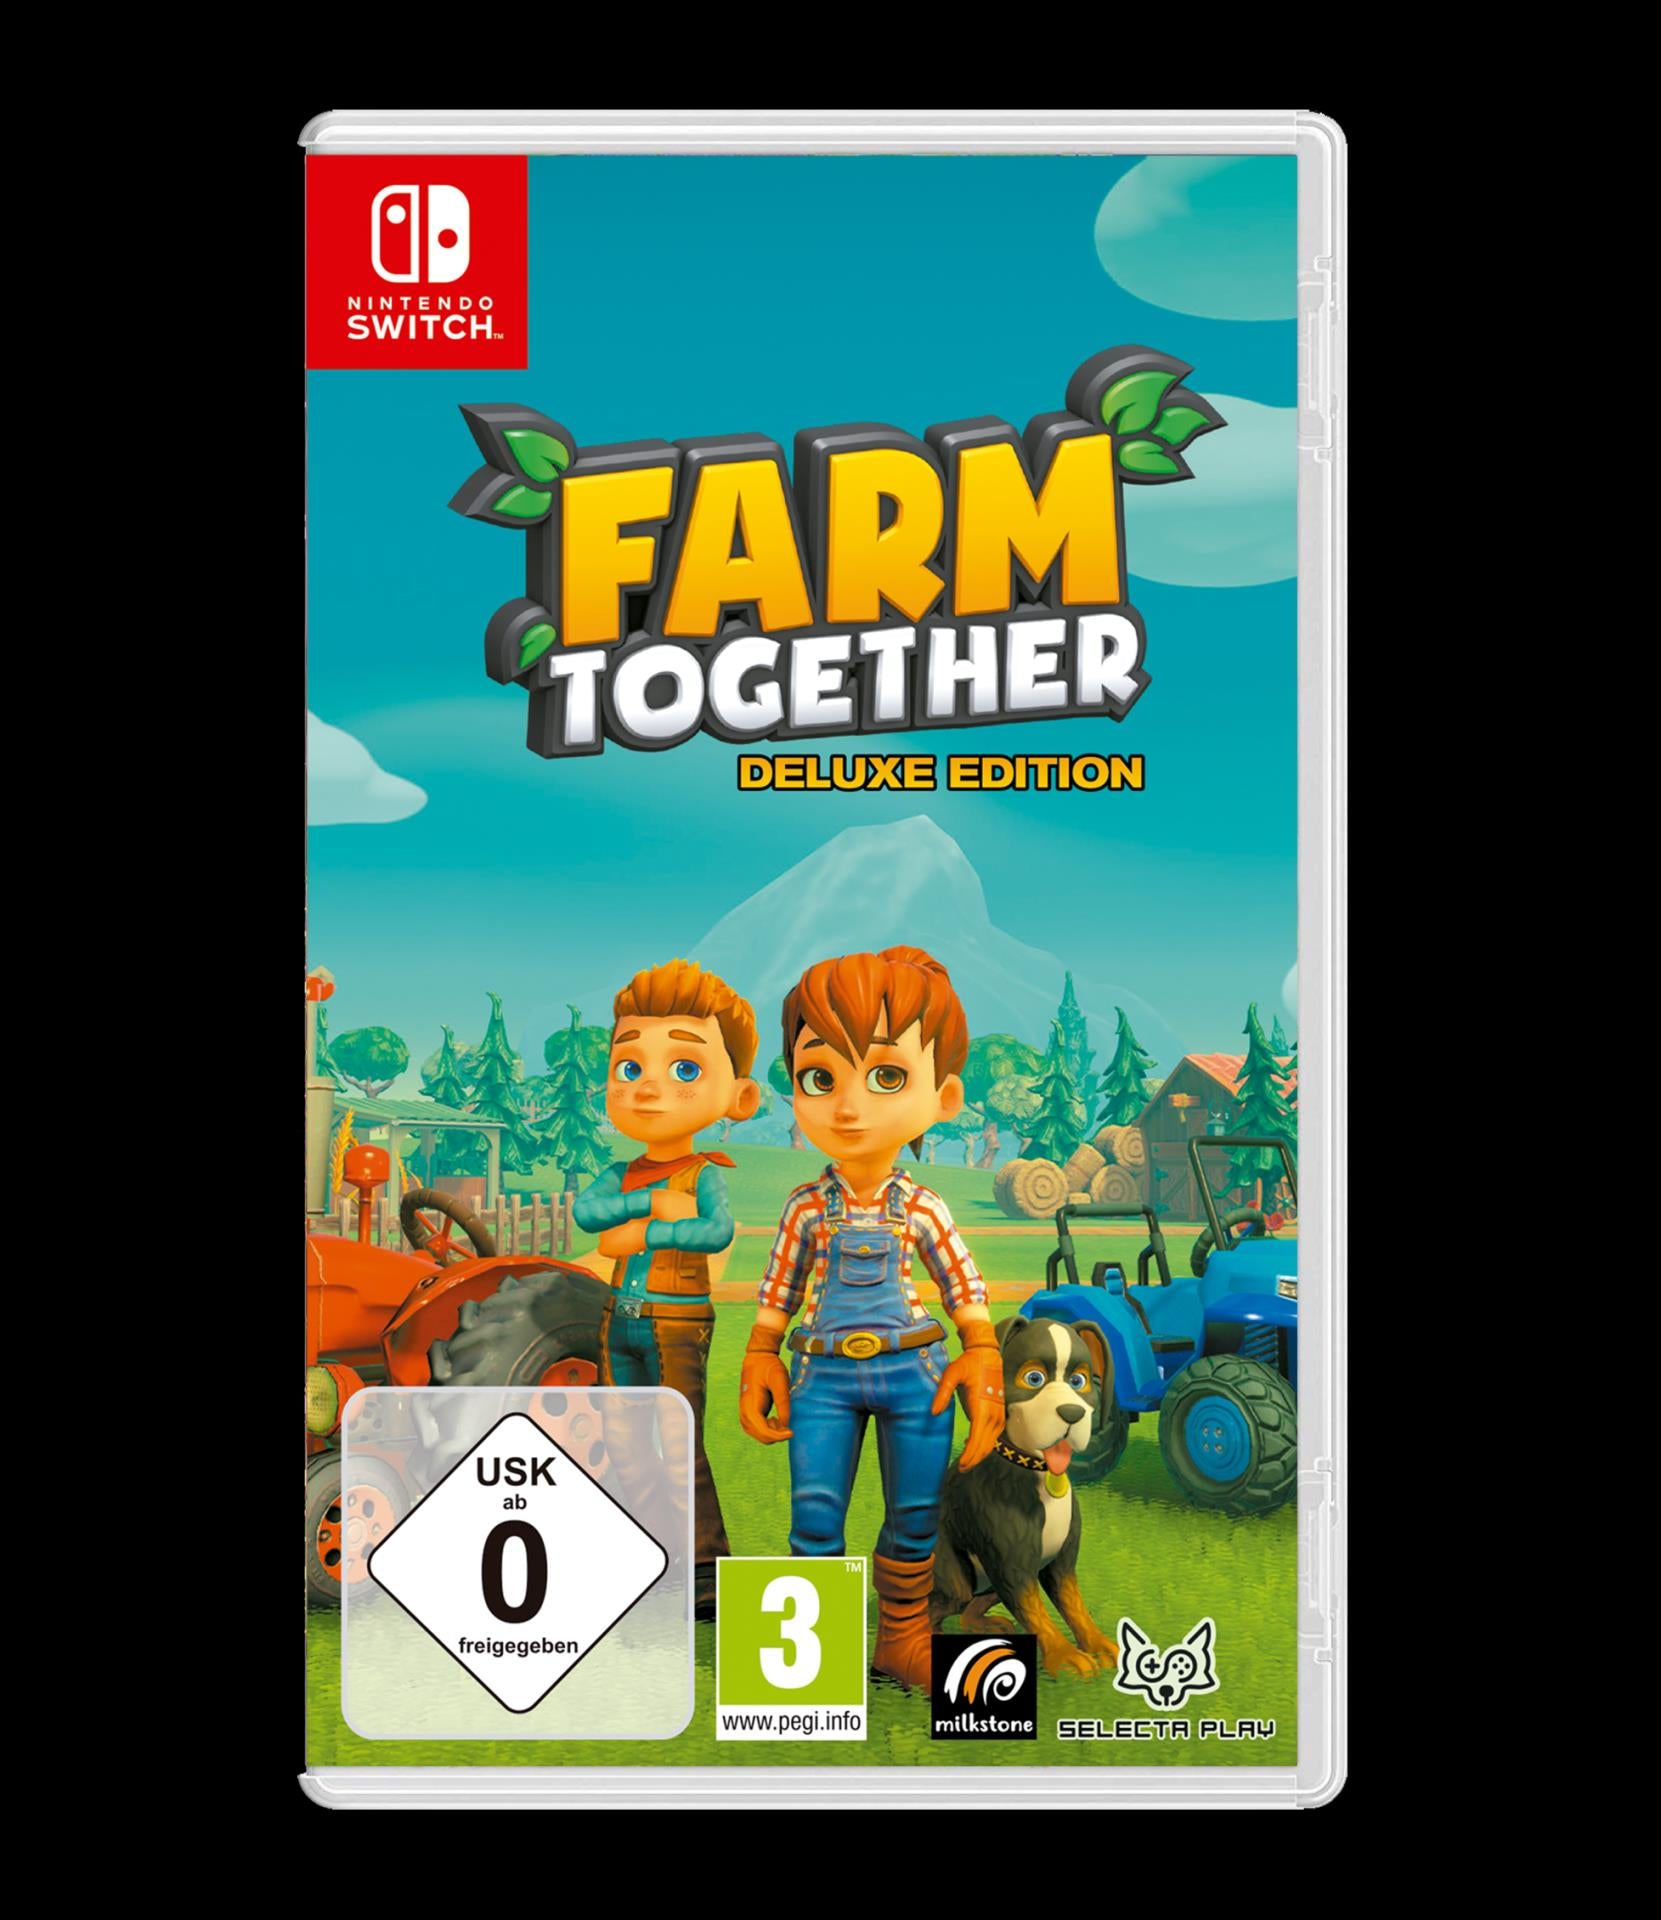 Farm Together Deluxe Edition